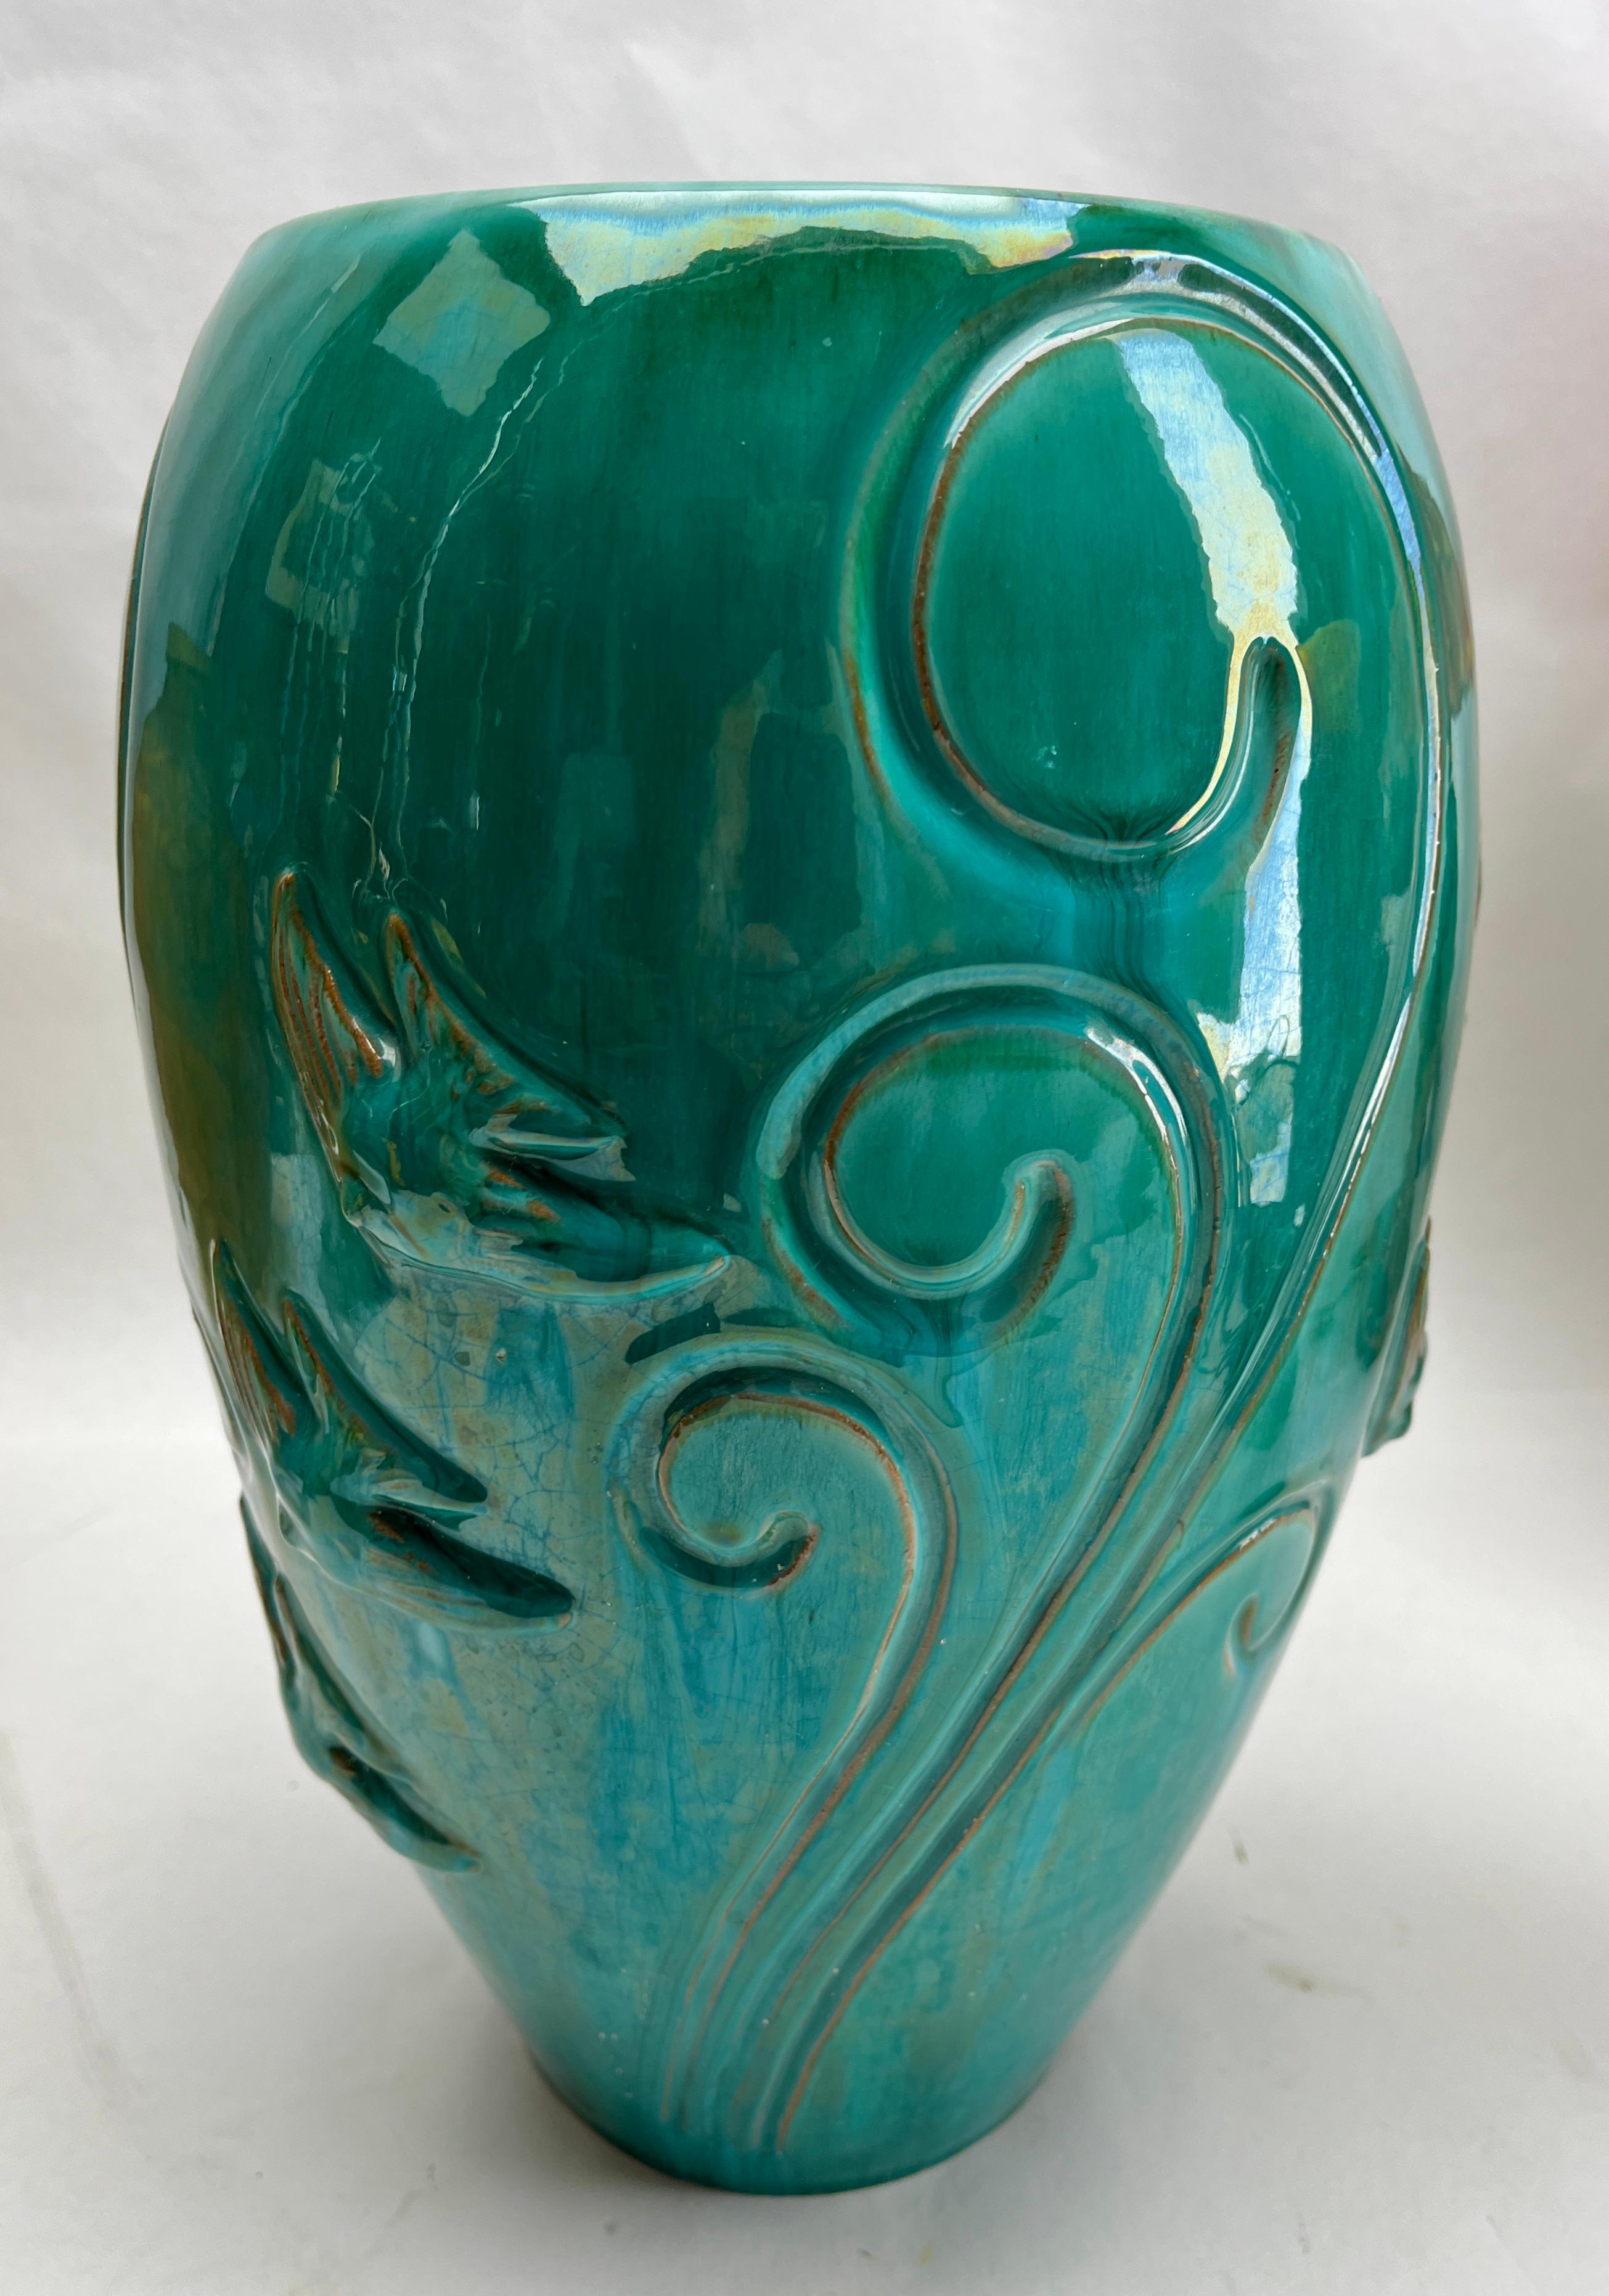 Glazed Alexandre / Belgium Vase green glazed terracotta decorated with Fish in relief For Sale